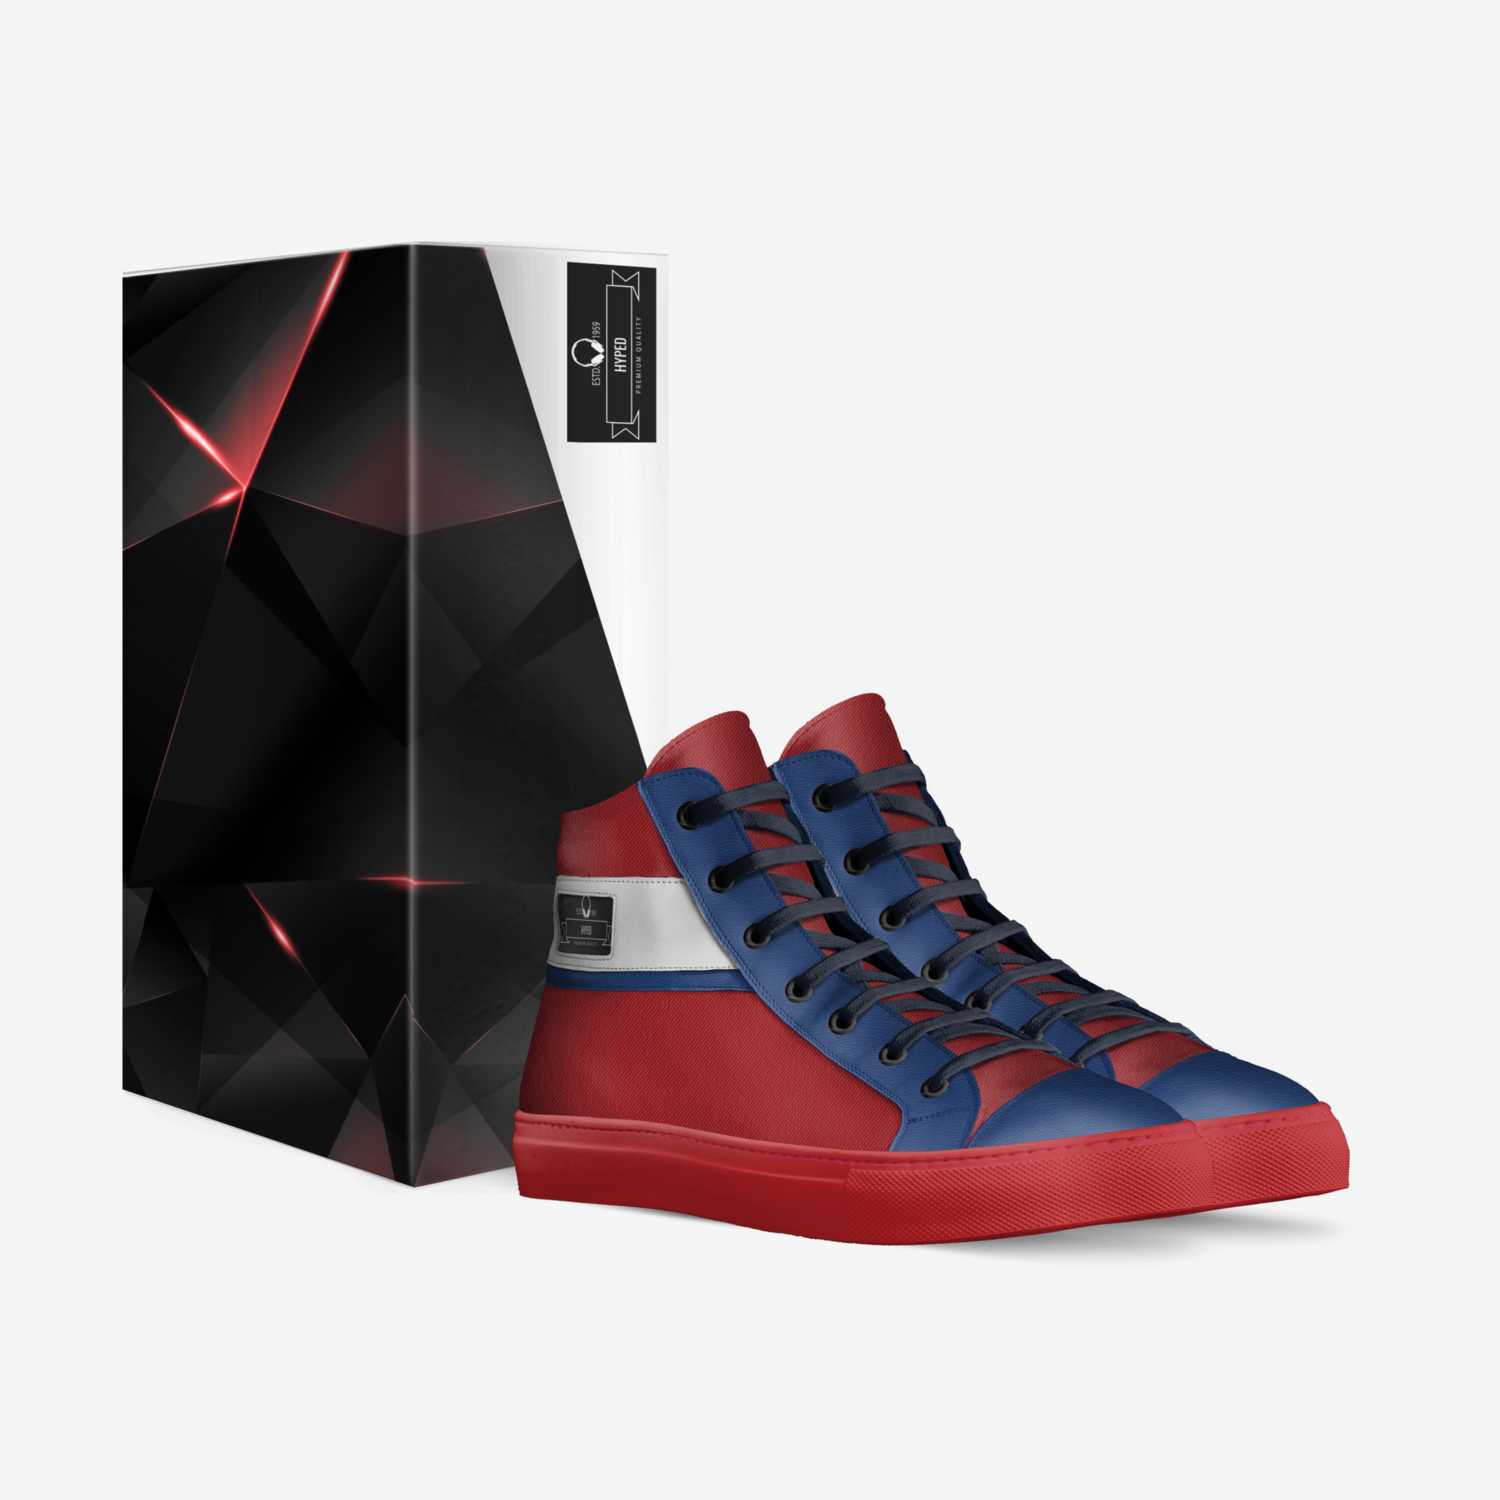 the patriot custom made in Italy shoes by Miles Blakc | Box view